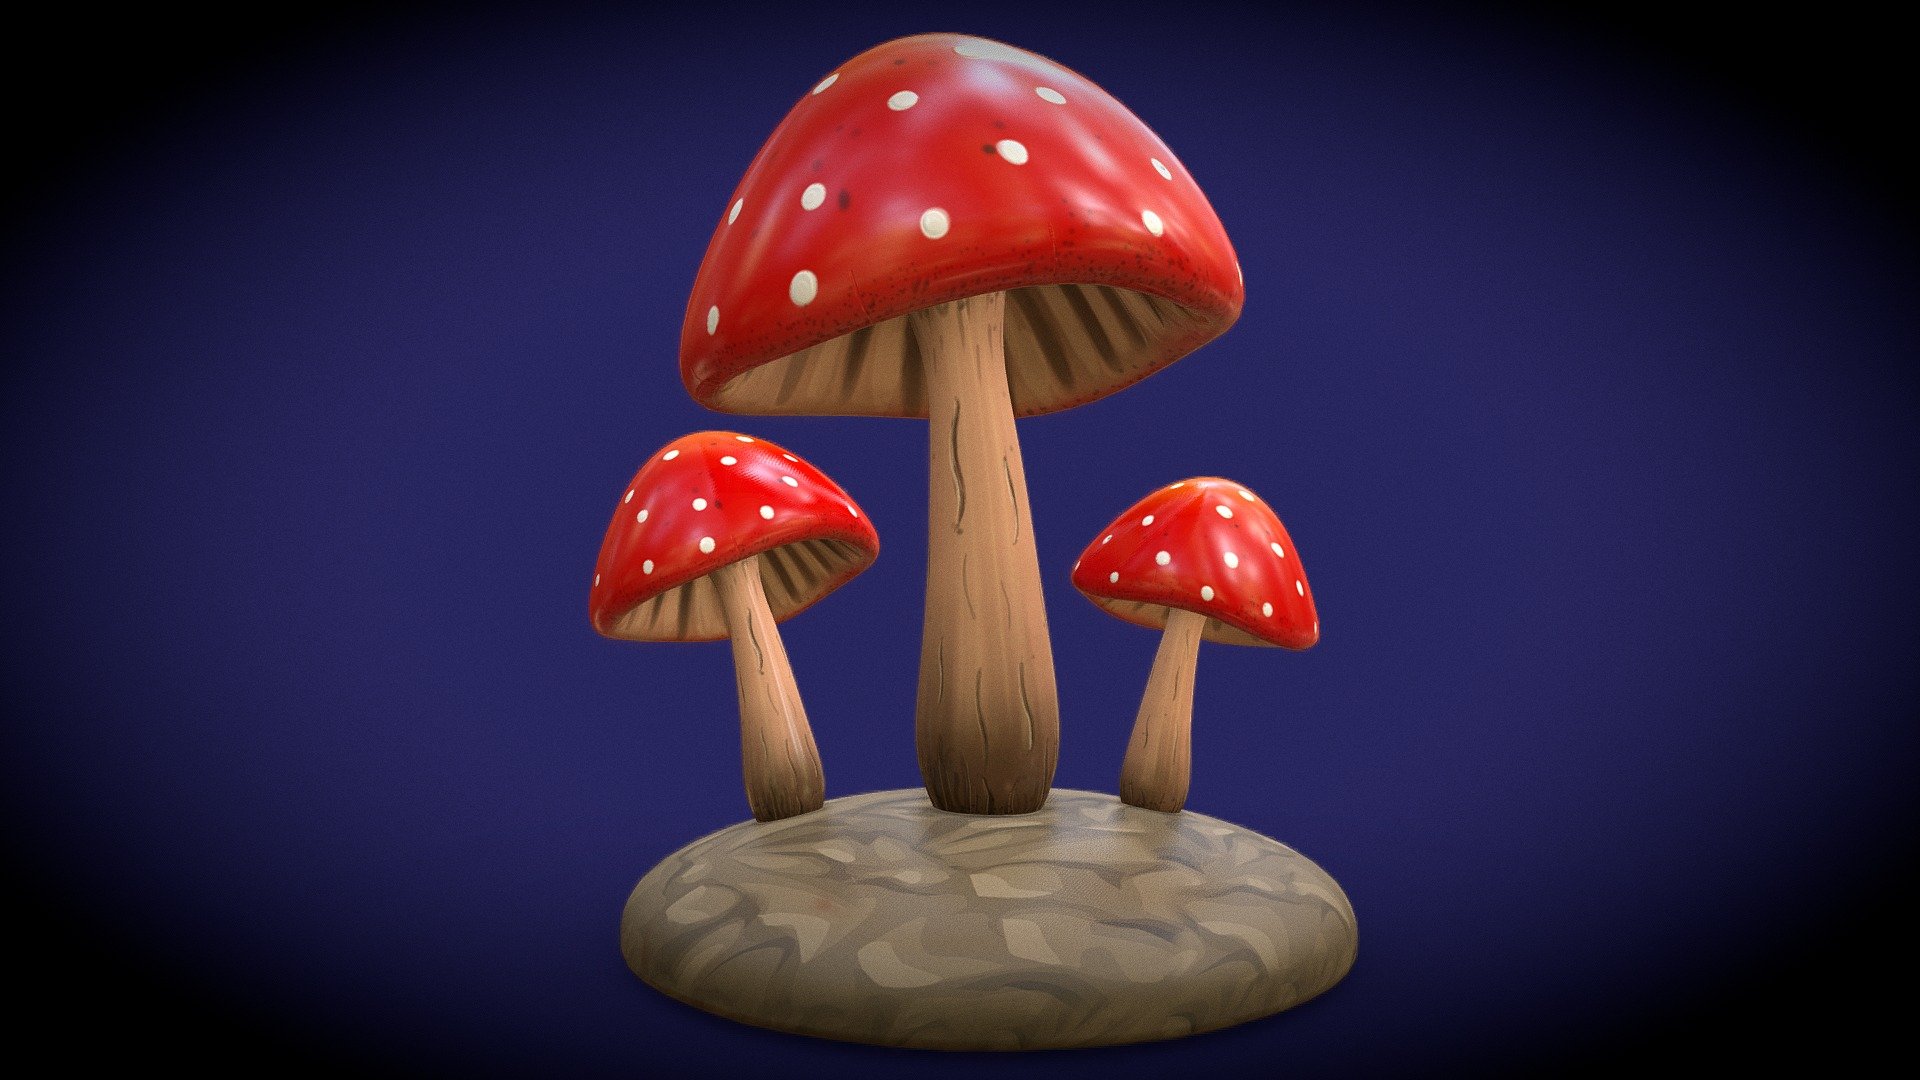 This is the tutorial result for my Texture Painting in Blender for Beginners Tutorial. When purchased, you will get a zip file with all of the project files.

Watch the tutorial here: https://www.youtube.com/watch?v=4d4N8d4ki2Y

Contents:

Finished Blender File with Mushroom

Texture Painted Maps

Final Renders

Dirt Texture

HDRI Lighting - Hand Painted Mushrooms - Buy Royalty Free 3D model by Ryan King Art (@ryankingart) 3d model